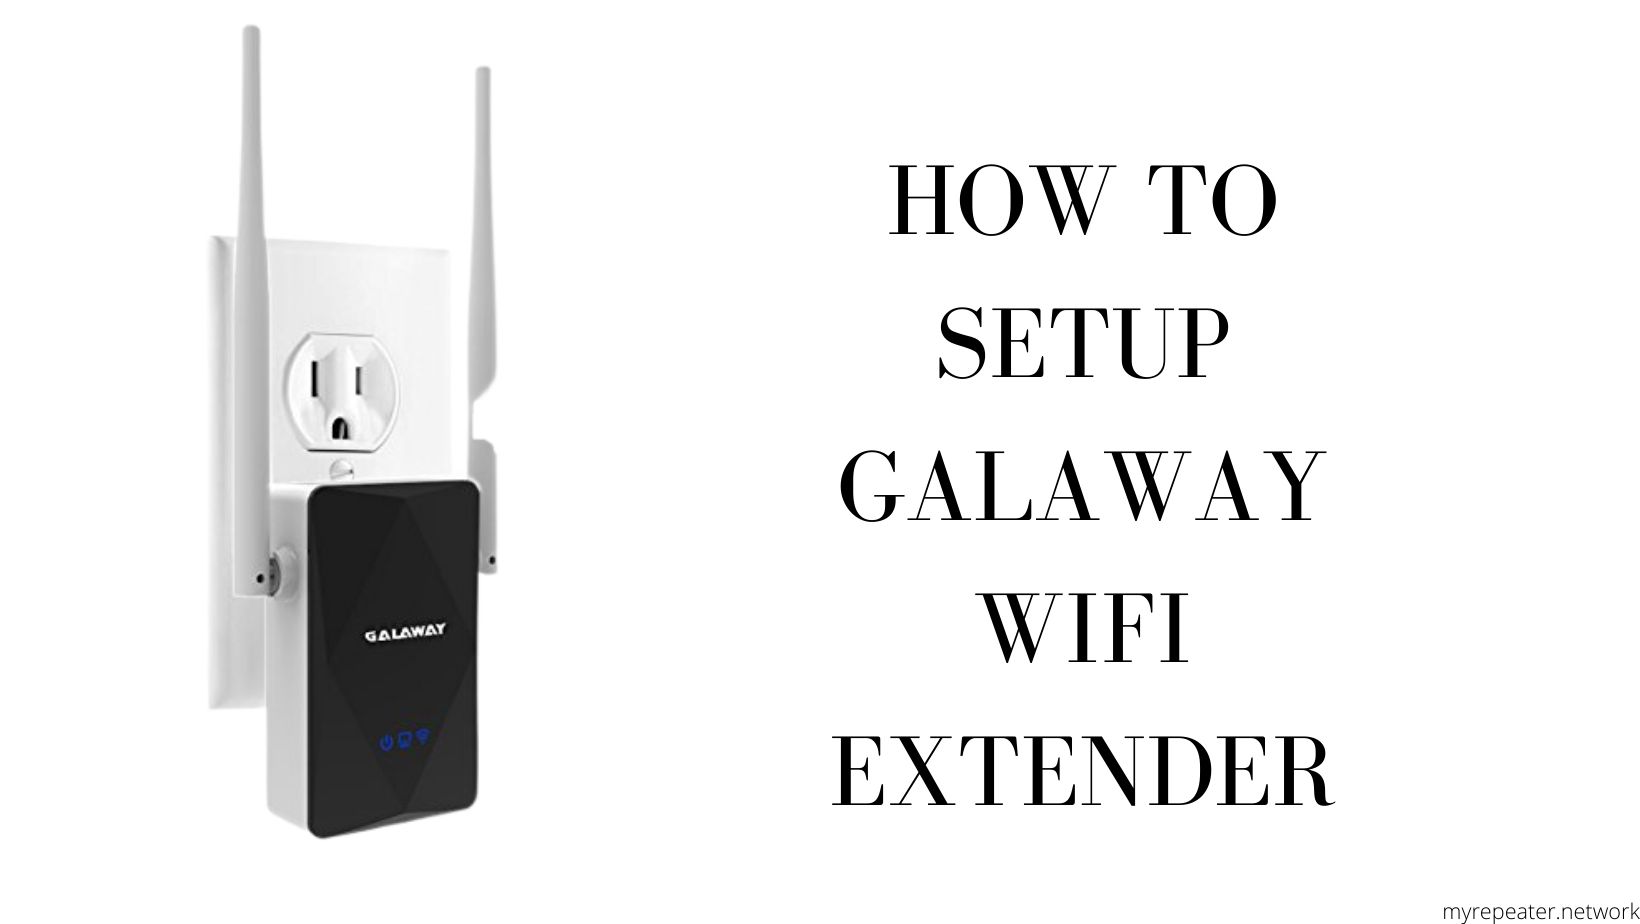 HOW TO SETUP GALAWAY WIFI EXTENDER